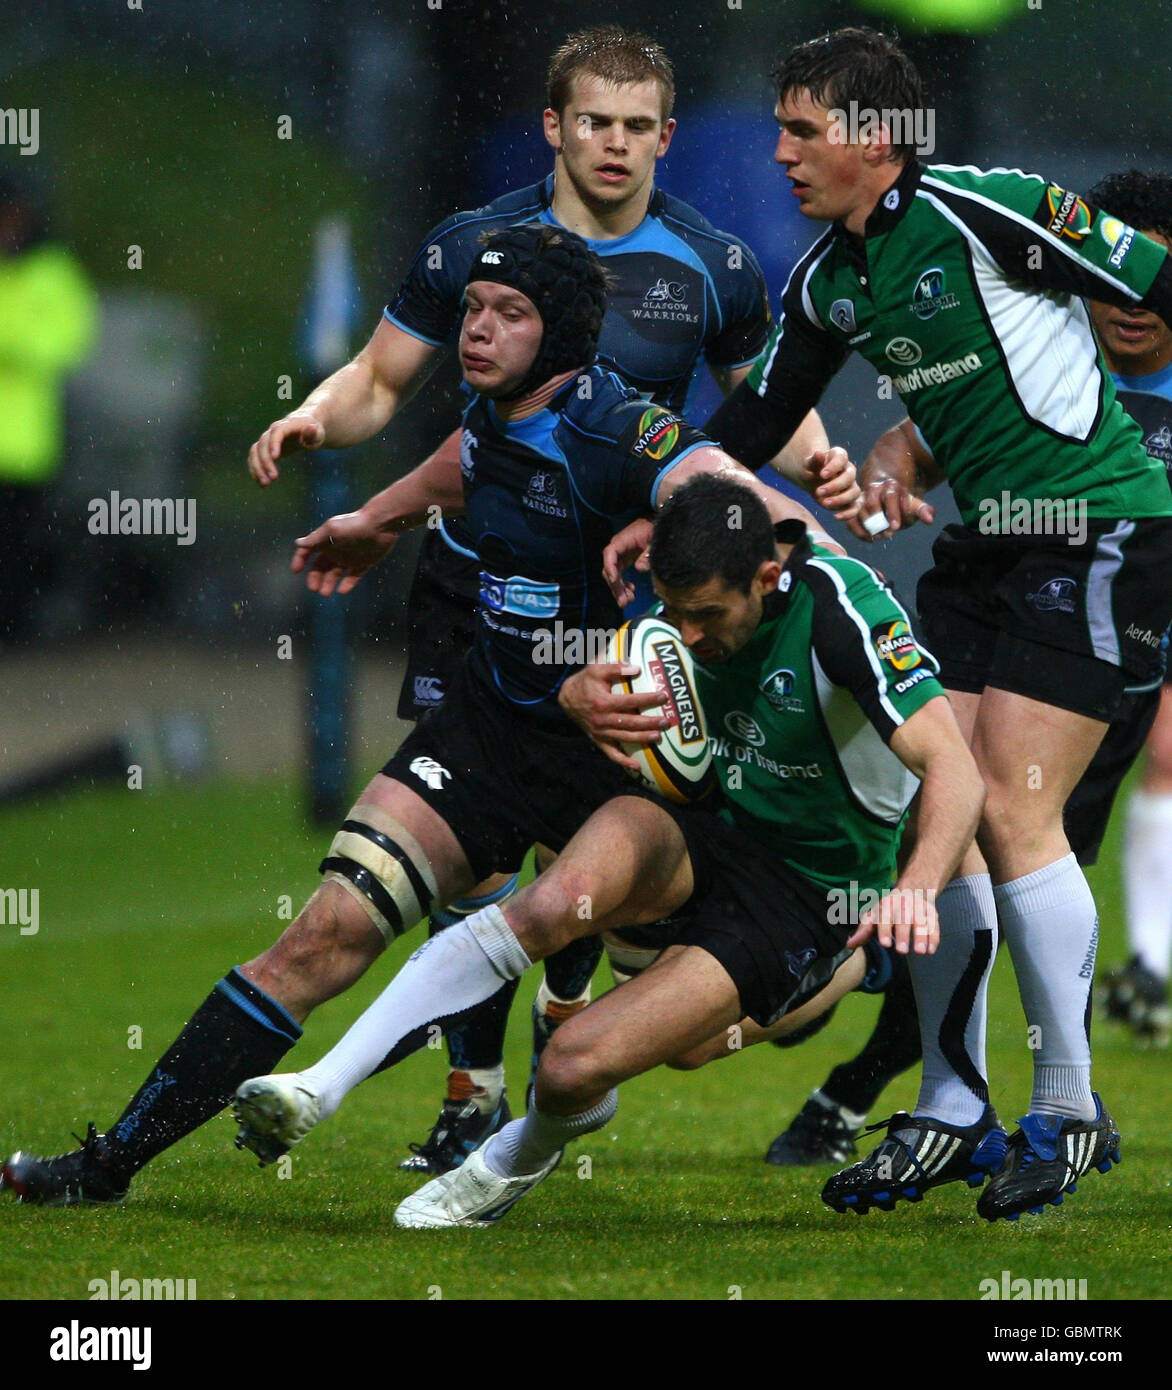 Glasgow Warriors' Callum Forrester attempts to bring down Connacht's Frank Murphy during the Magners League match at Firhill Stadium, Glasgow, Scotland. Stock Photo